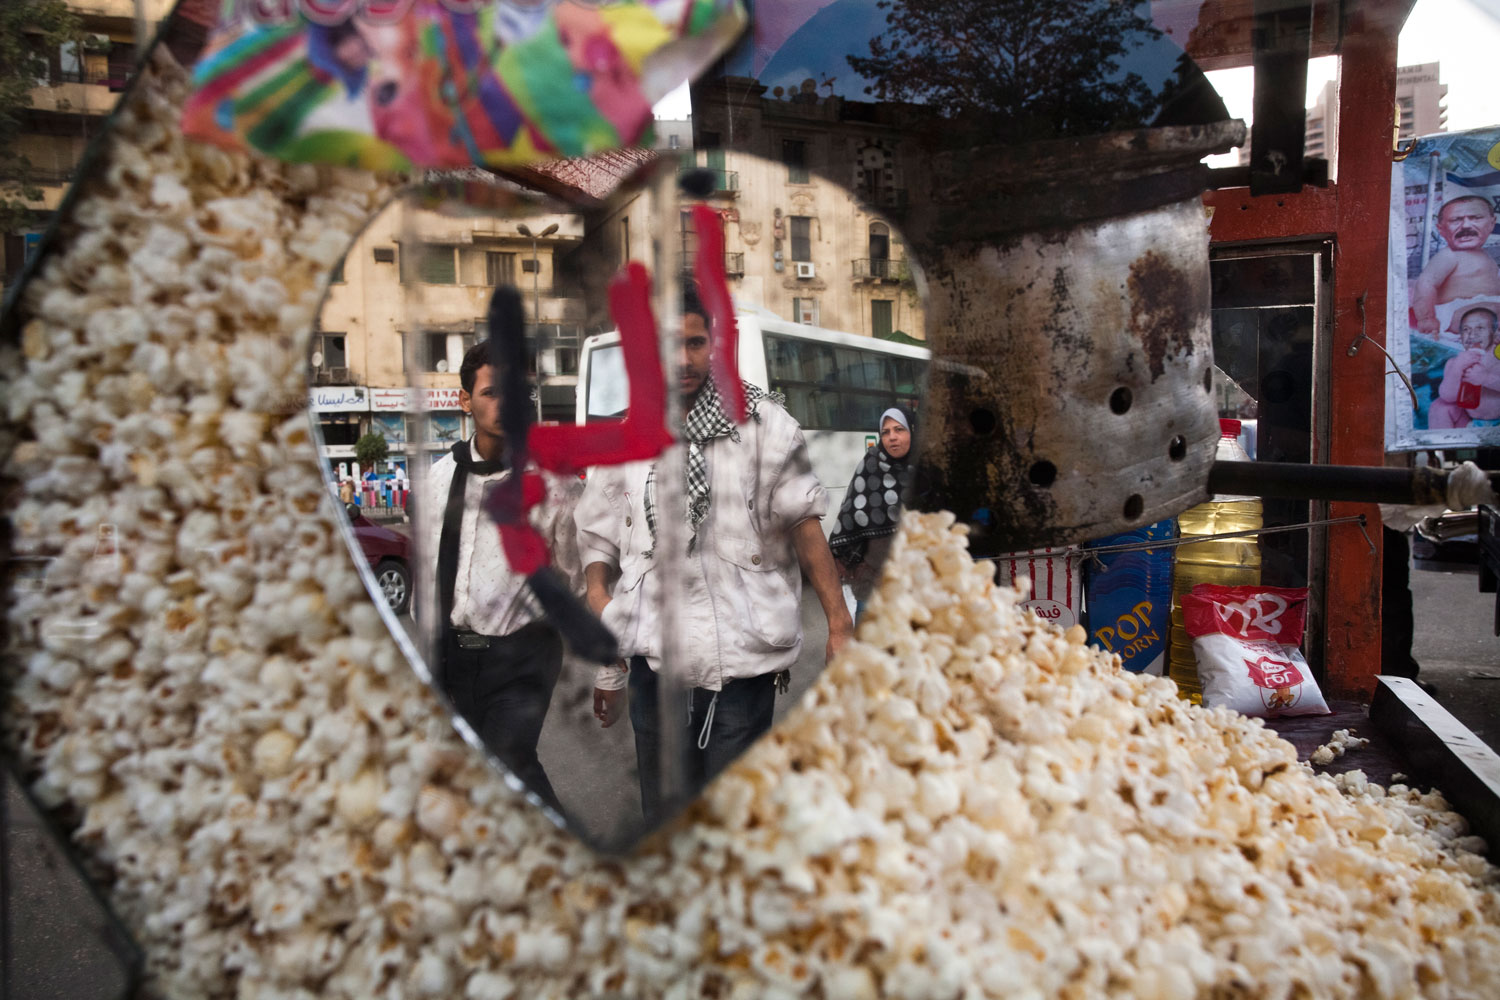 Two young Egyptian men walk past a popcorn vendor in Tahrir Square.